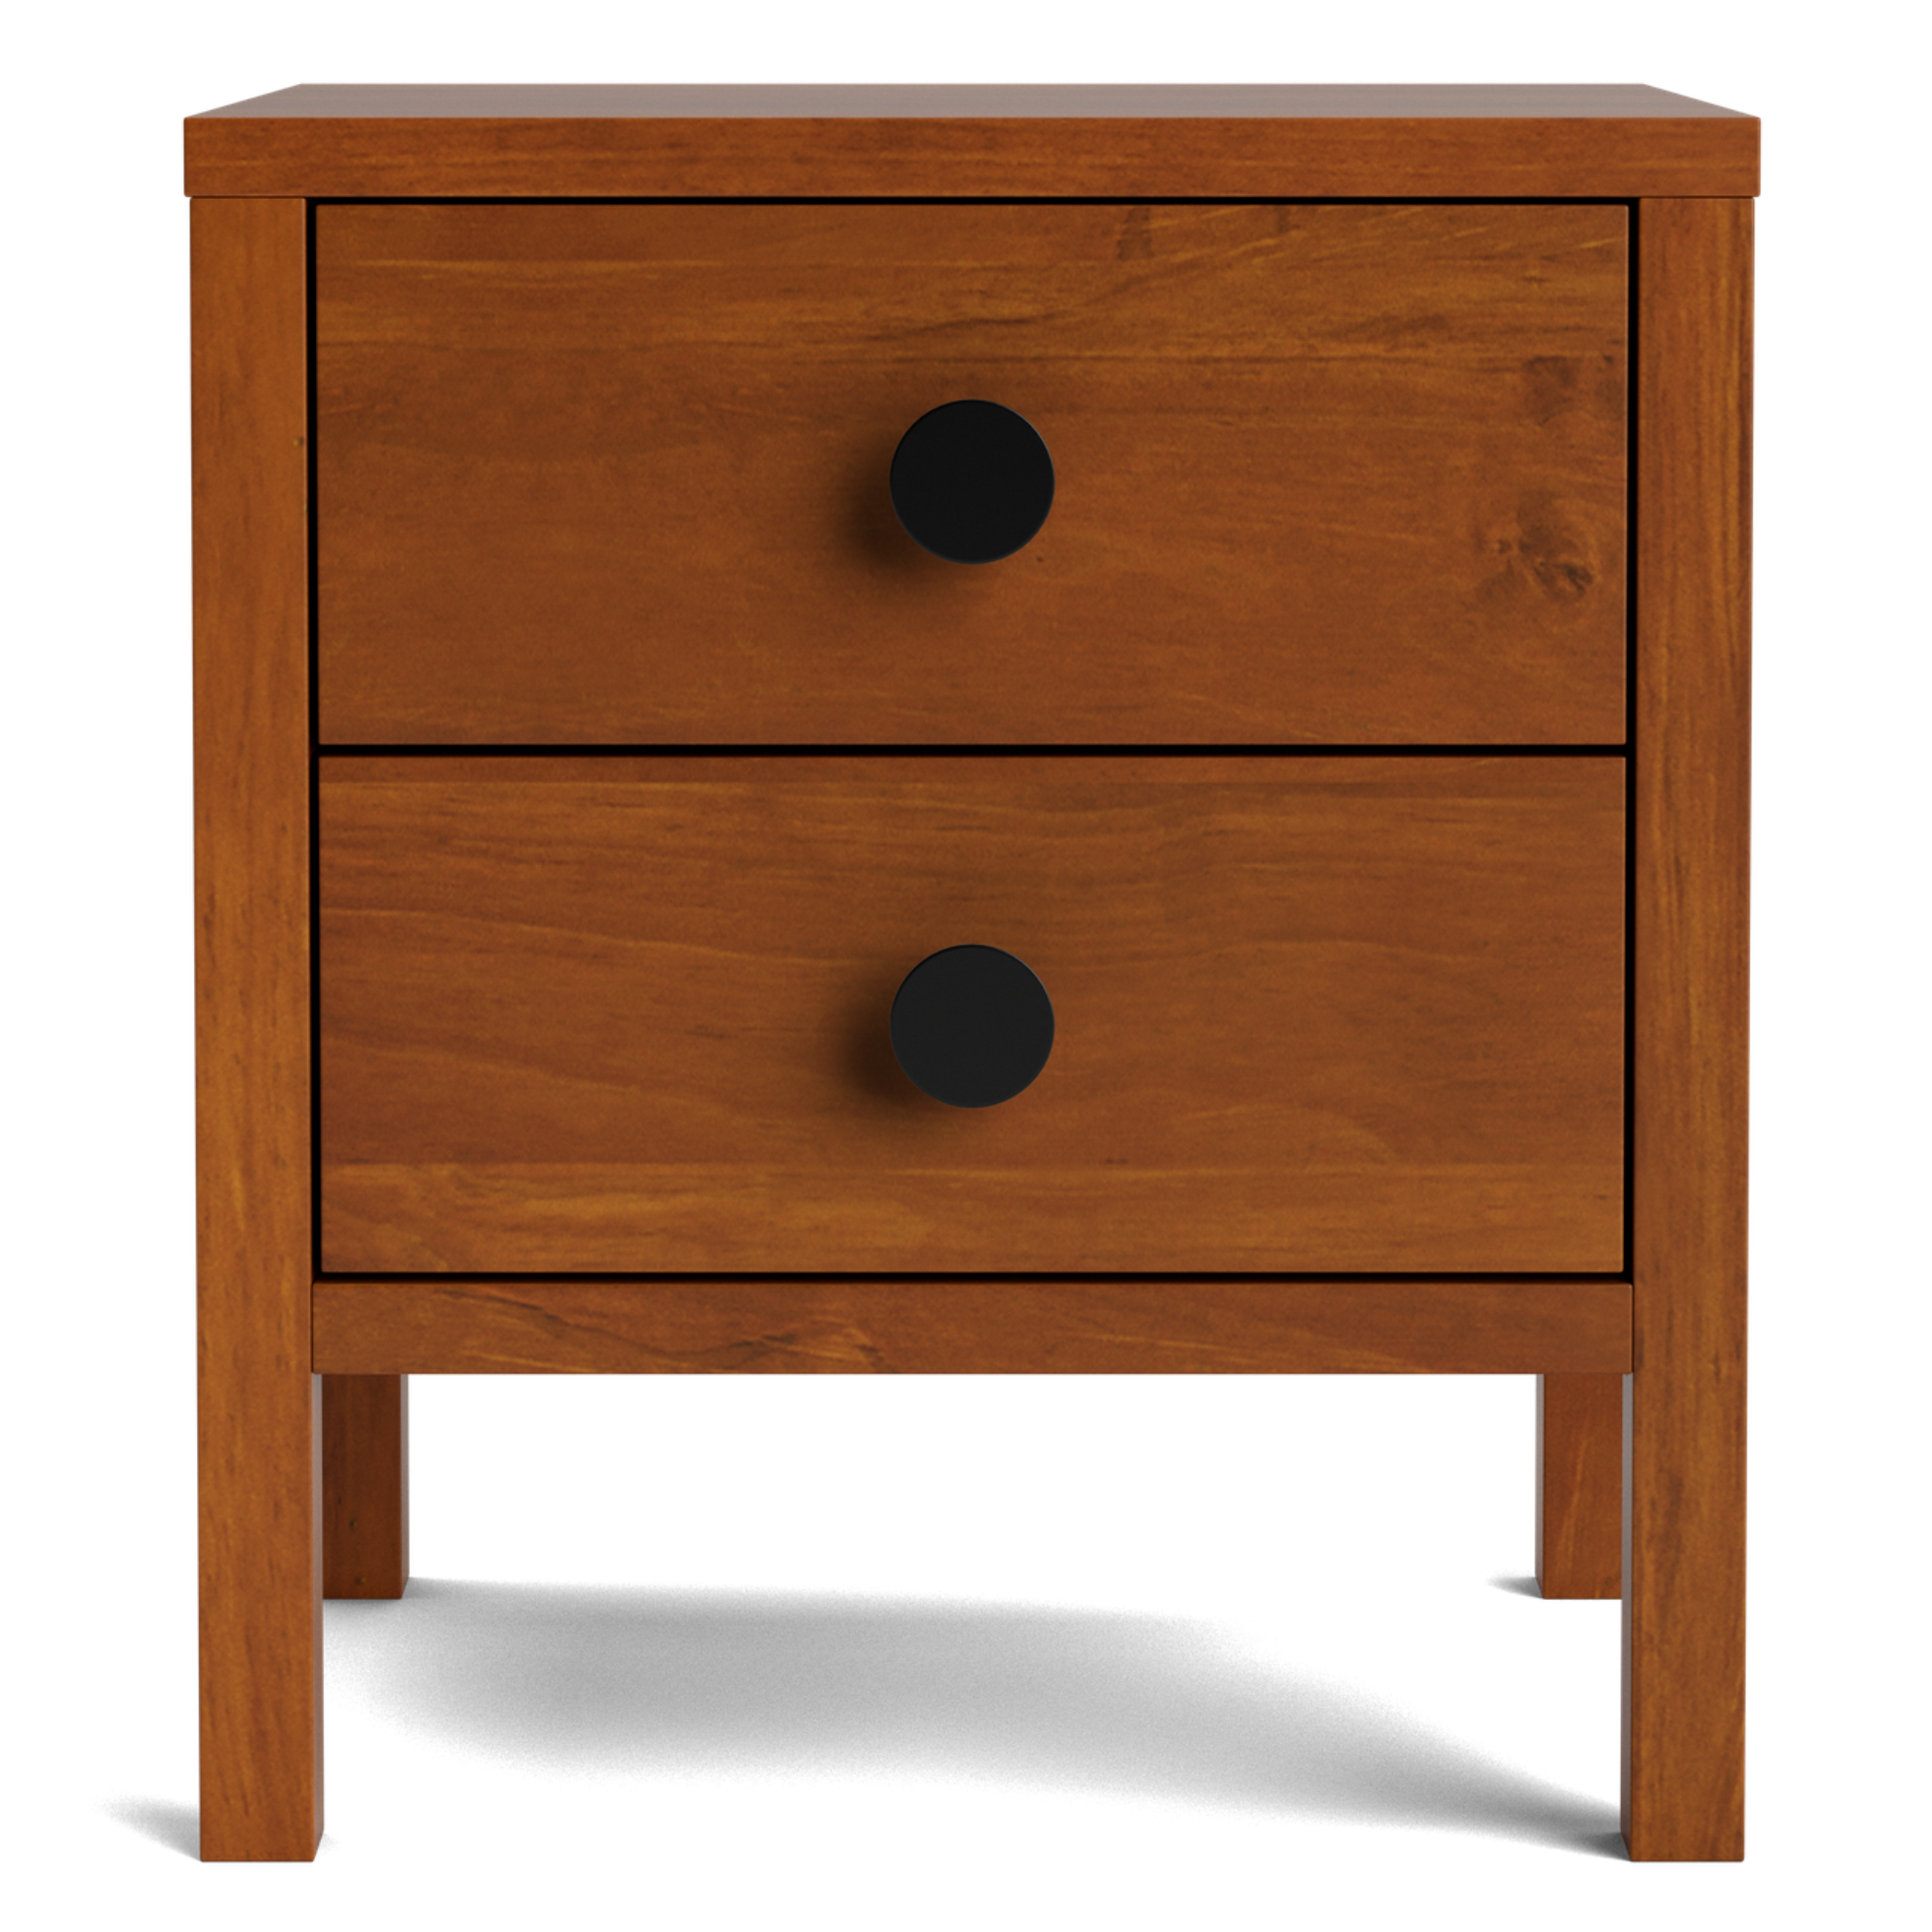 ANDES 2 DRAWER BEDSIDE | NZ PINE OR AMERICAN ASH | NZ MADE